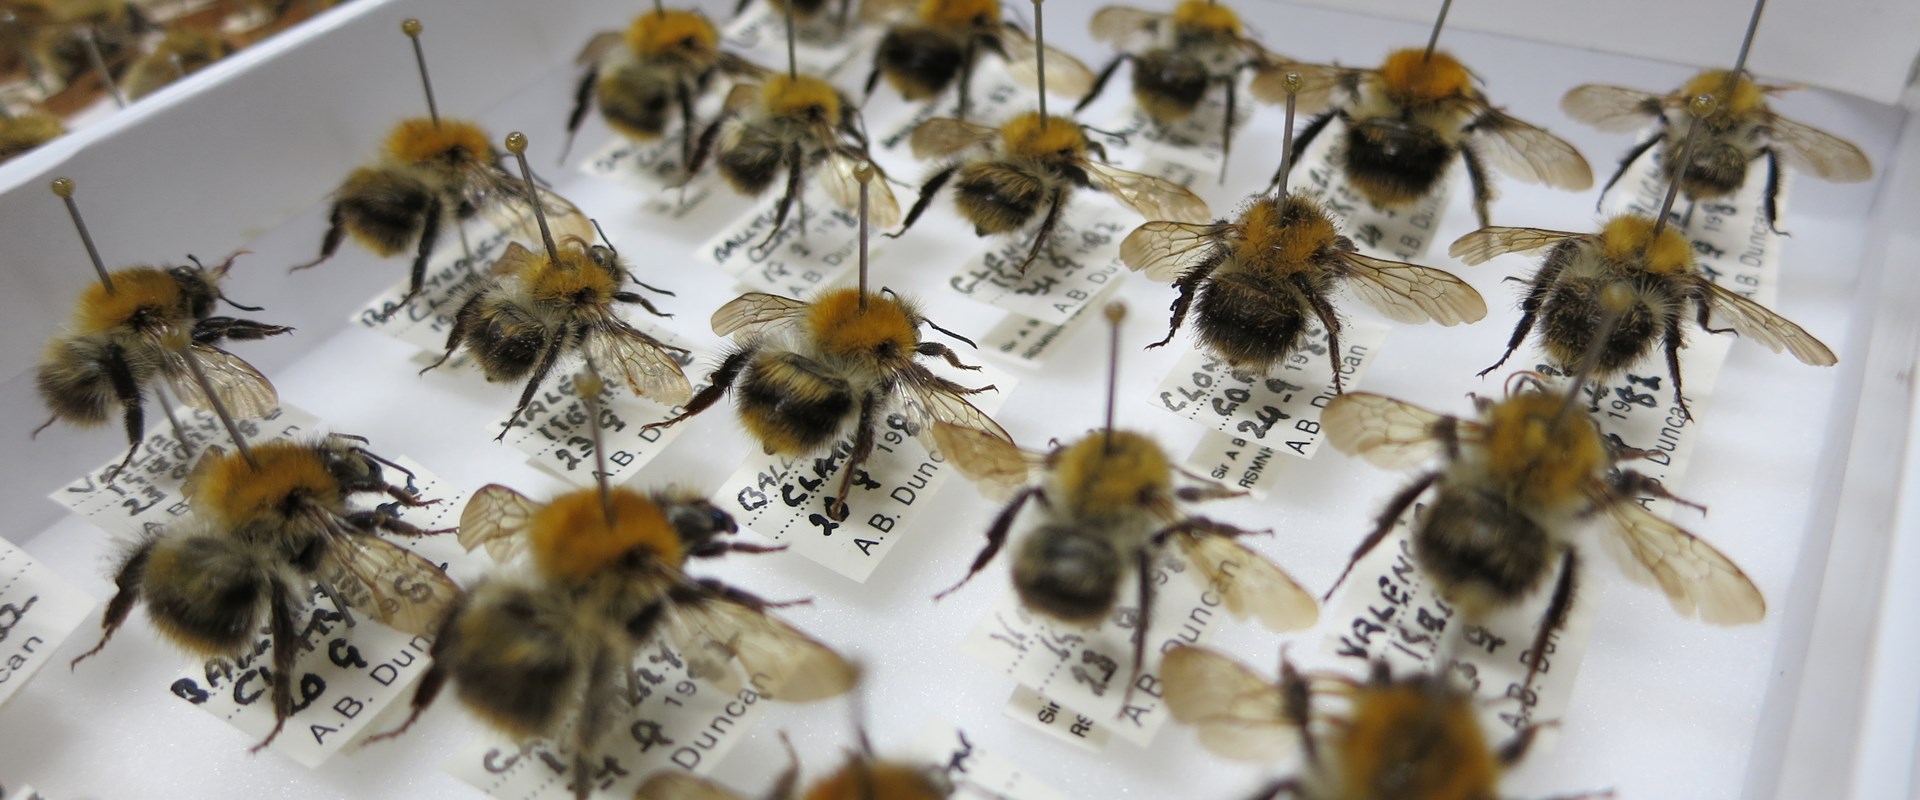 Astonishing Experiment Shows Bumble Bees “Play” With Objects